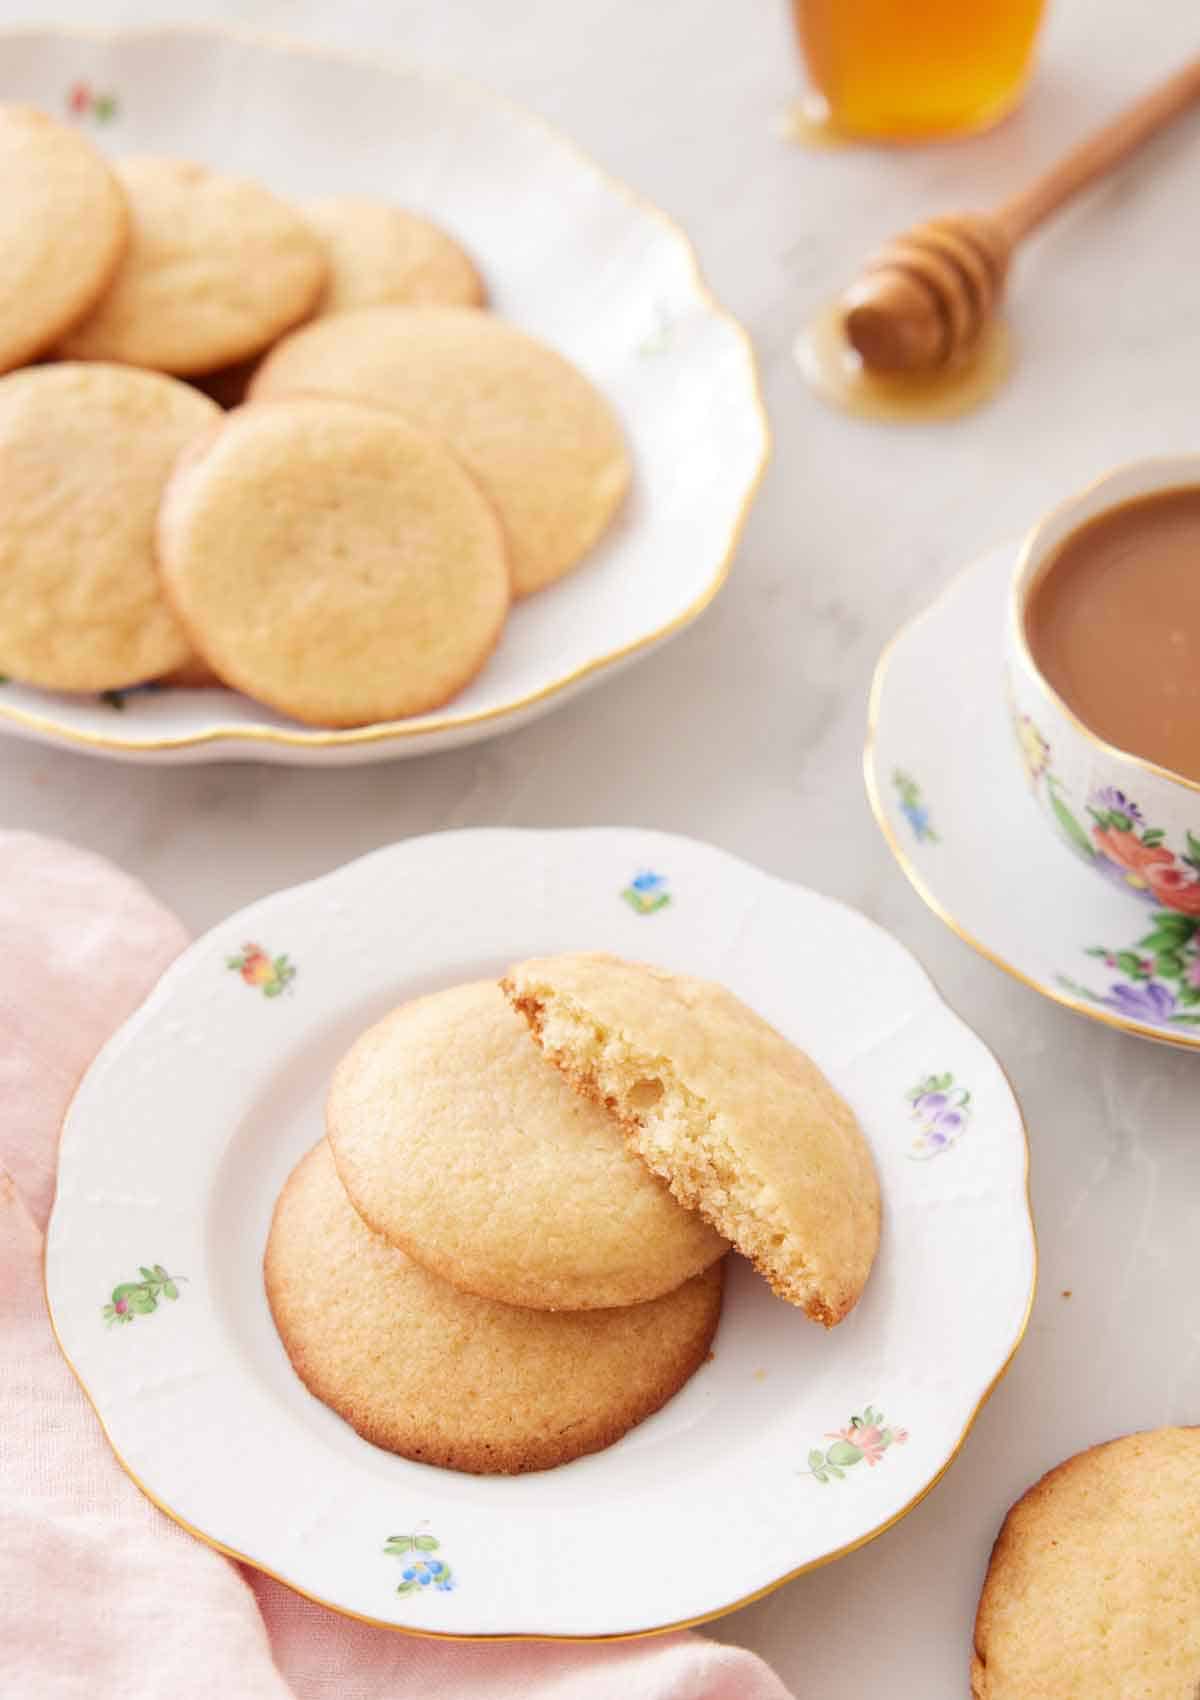 A plate with two and a half honey cookies with a platter of more cookies and cup of coffee in the back.